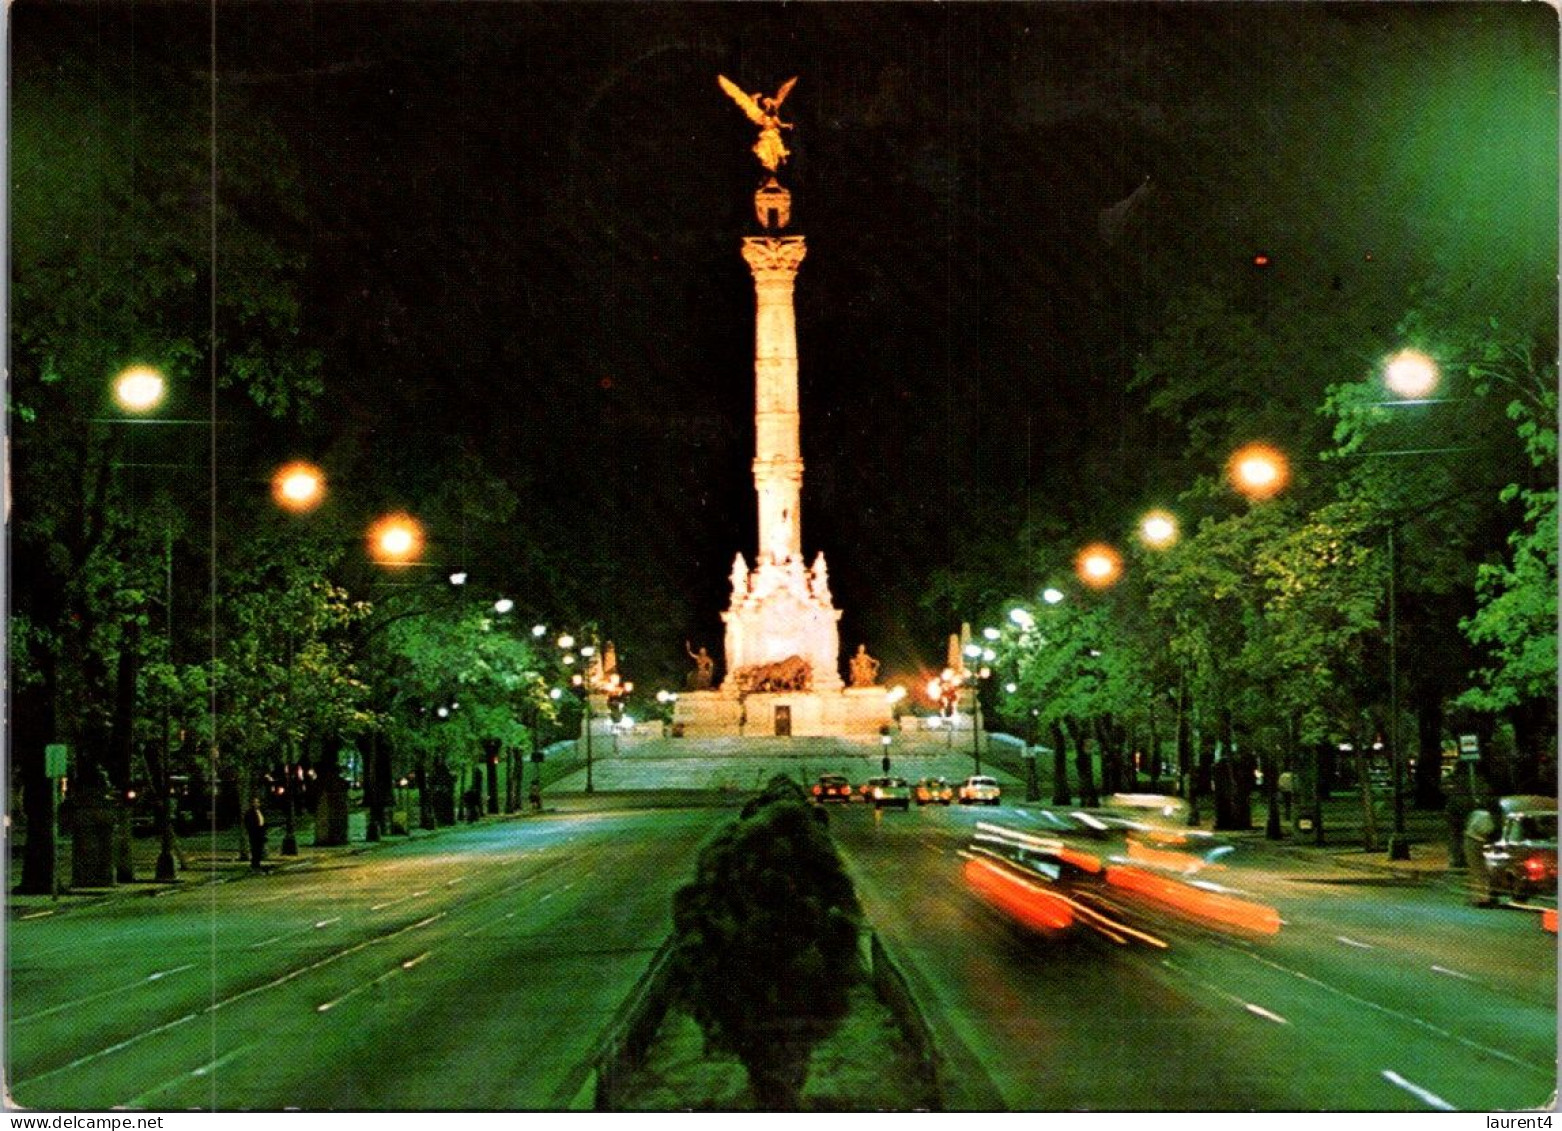 23-4-2024 (2 Z 48) Mexico (posted 1978) El Angel Monument At Night - Mexique